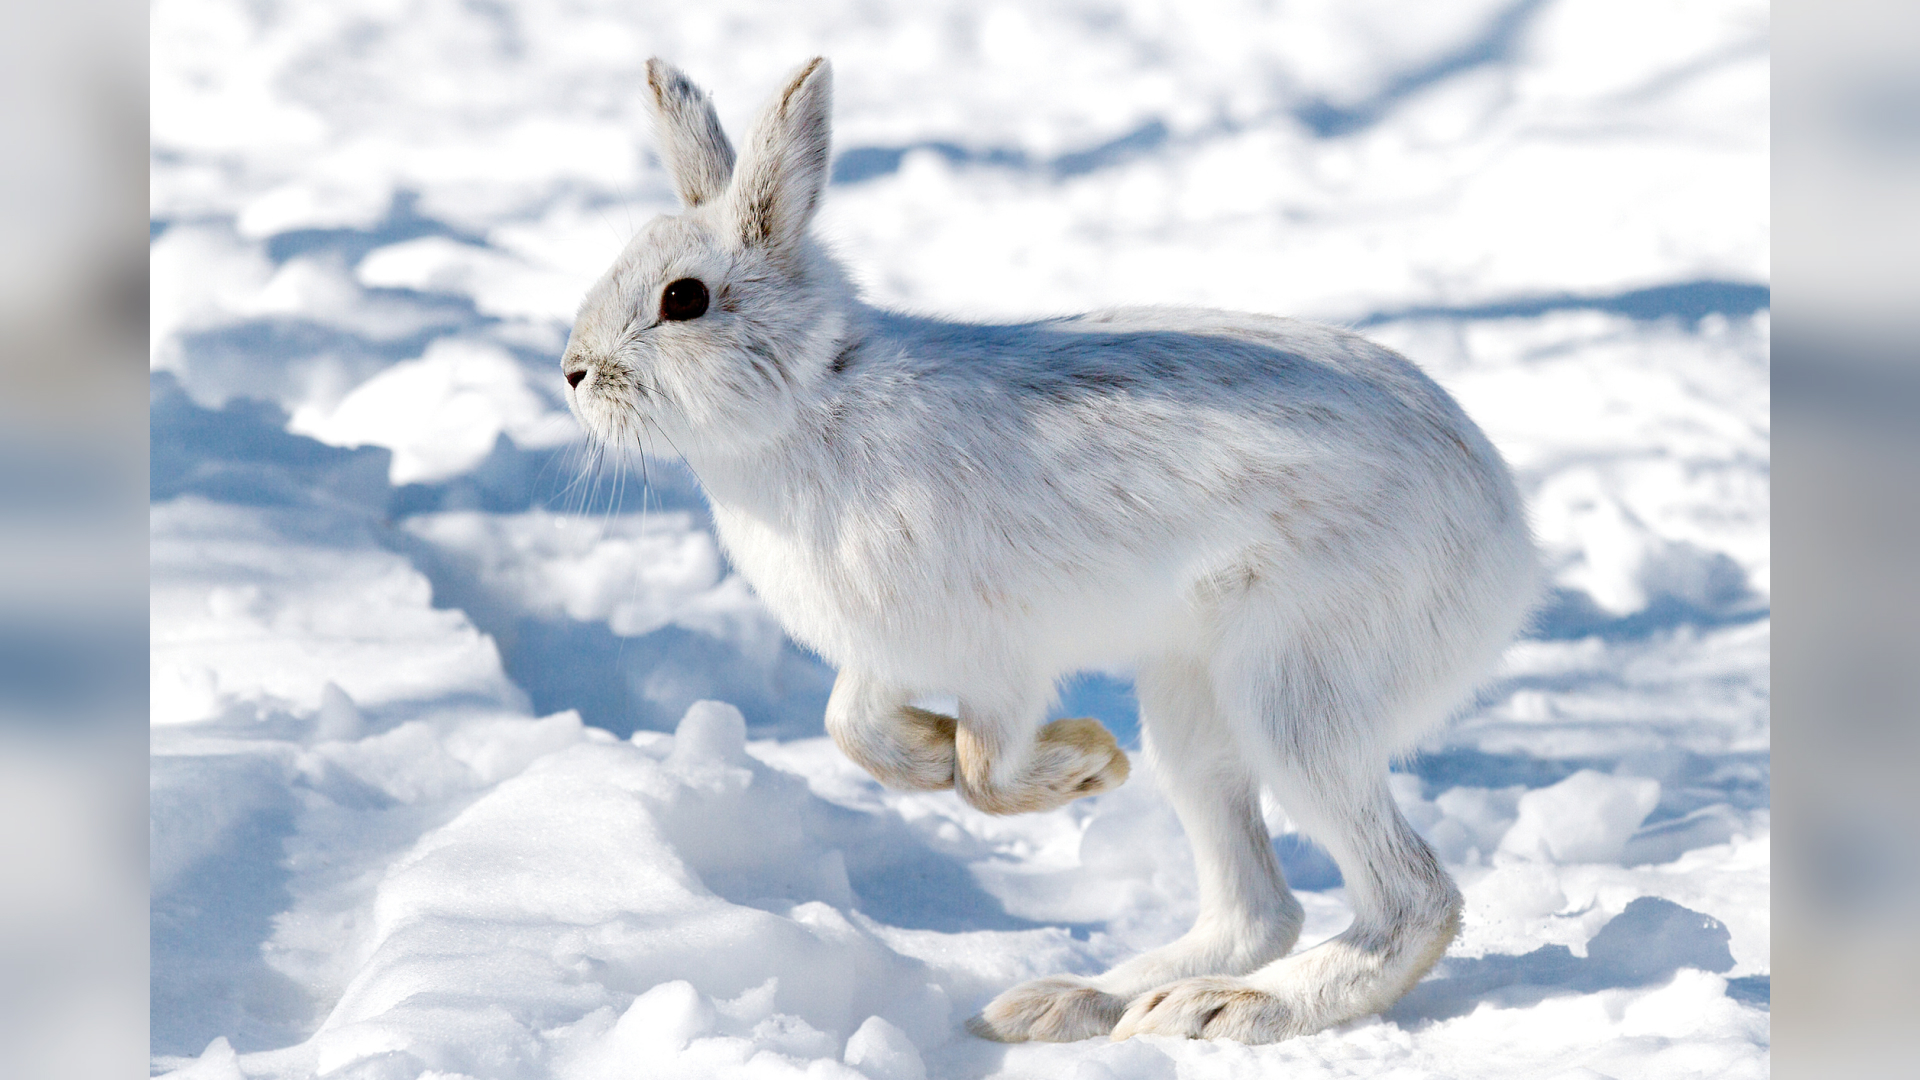 A portrait of a snowshoe hare captured mid-jump on top of a snowy ground